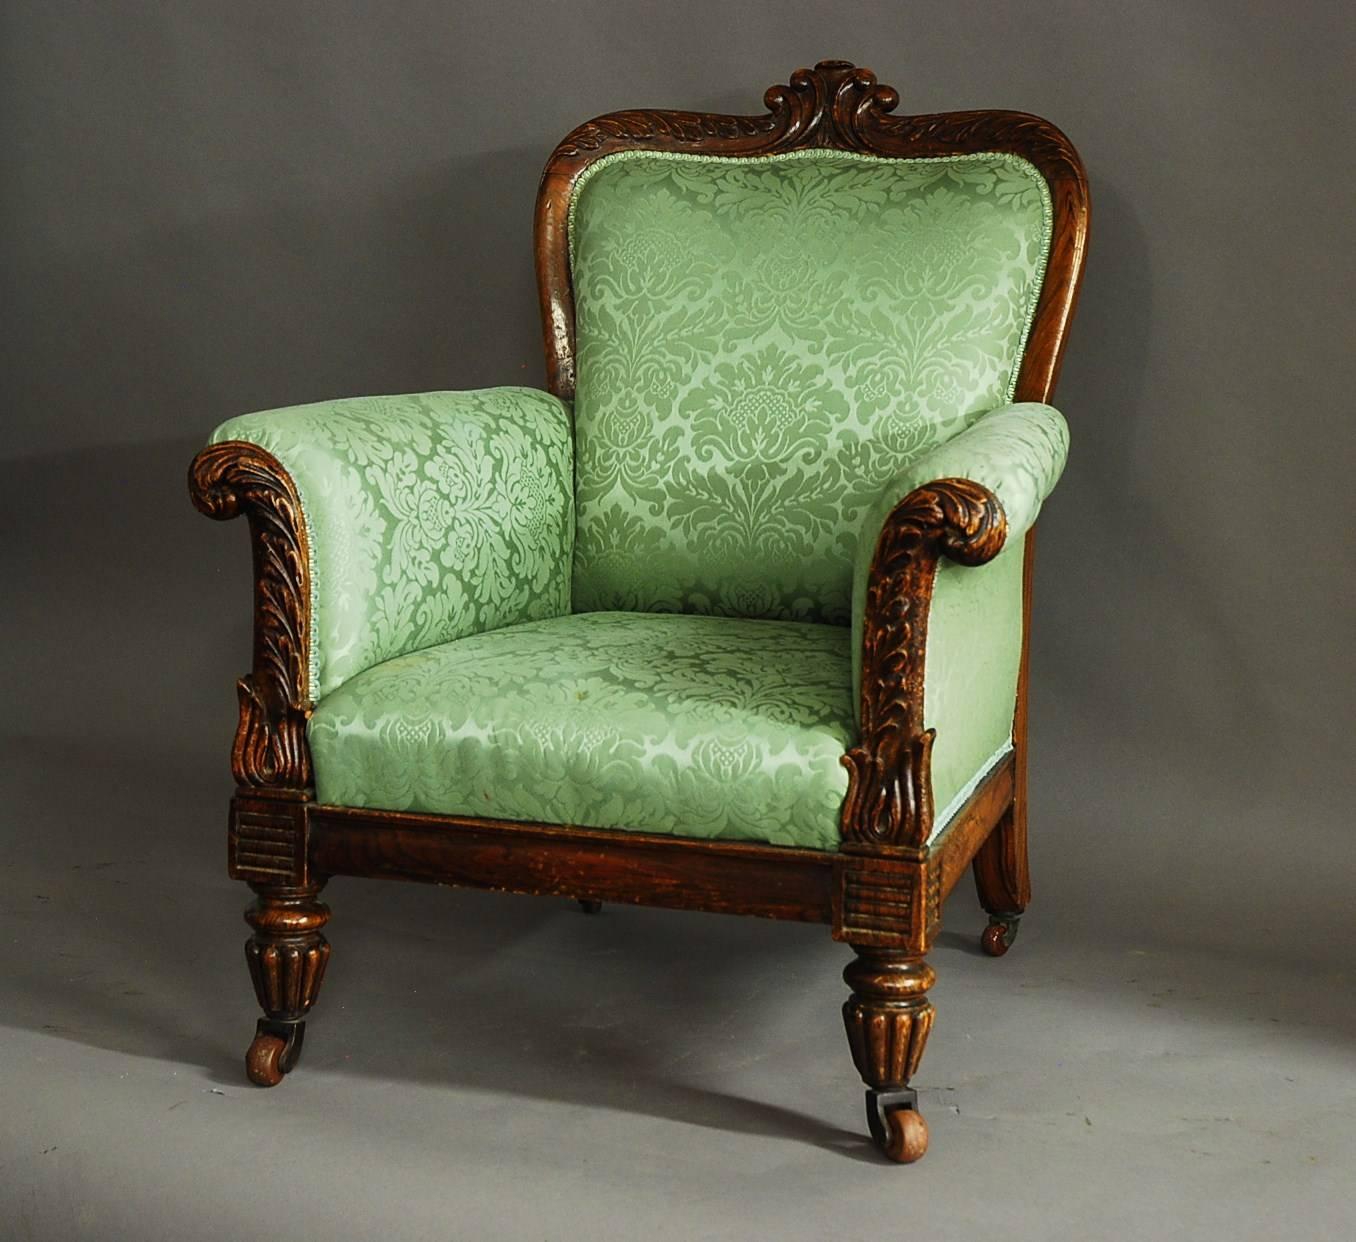 A William IV simulated rosewood upholstered armchair.

This chair consists of a beech frame painted with a simulated rosewood finish to replicate the grain of rosewood .

The back rail has a carved scrolling design to the centre with carved oak